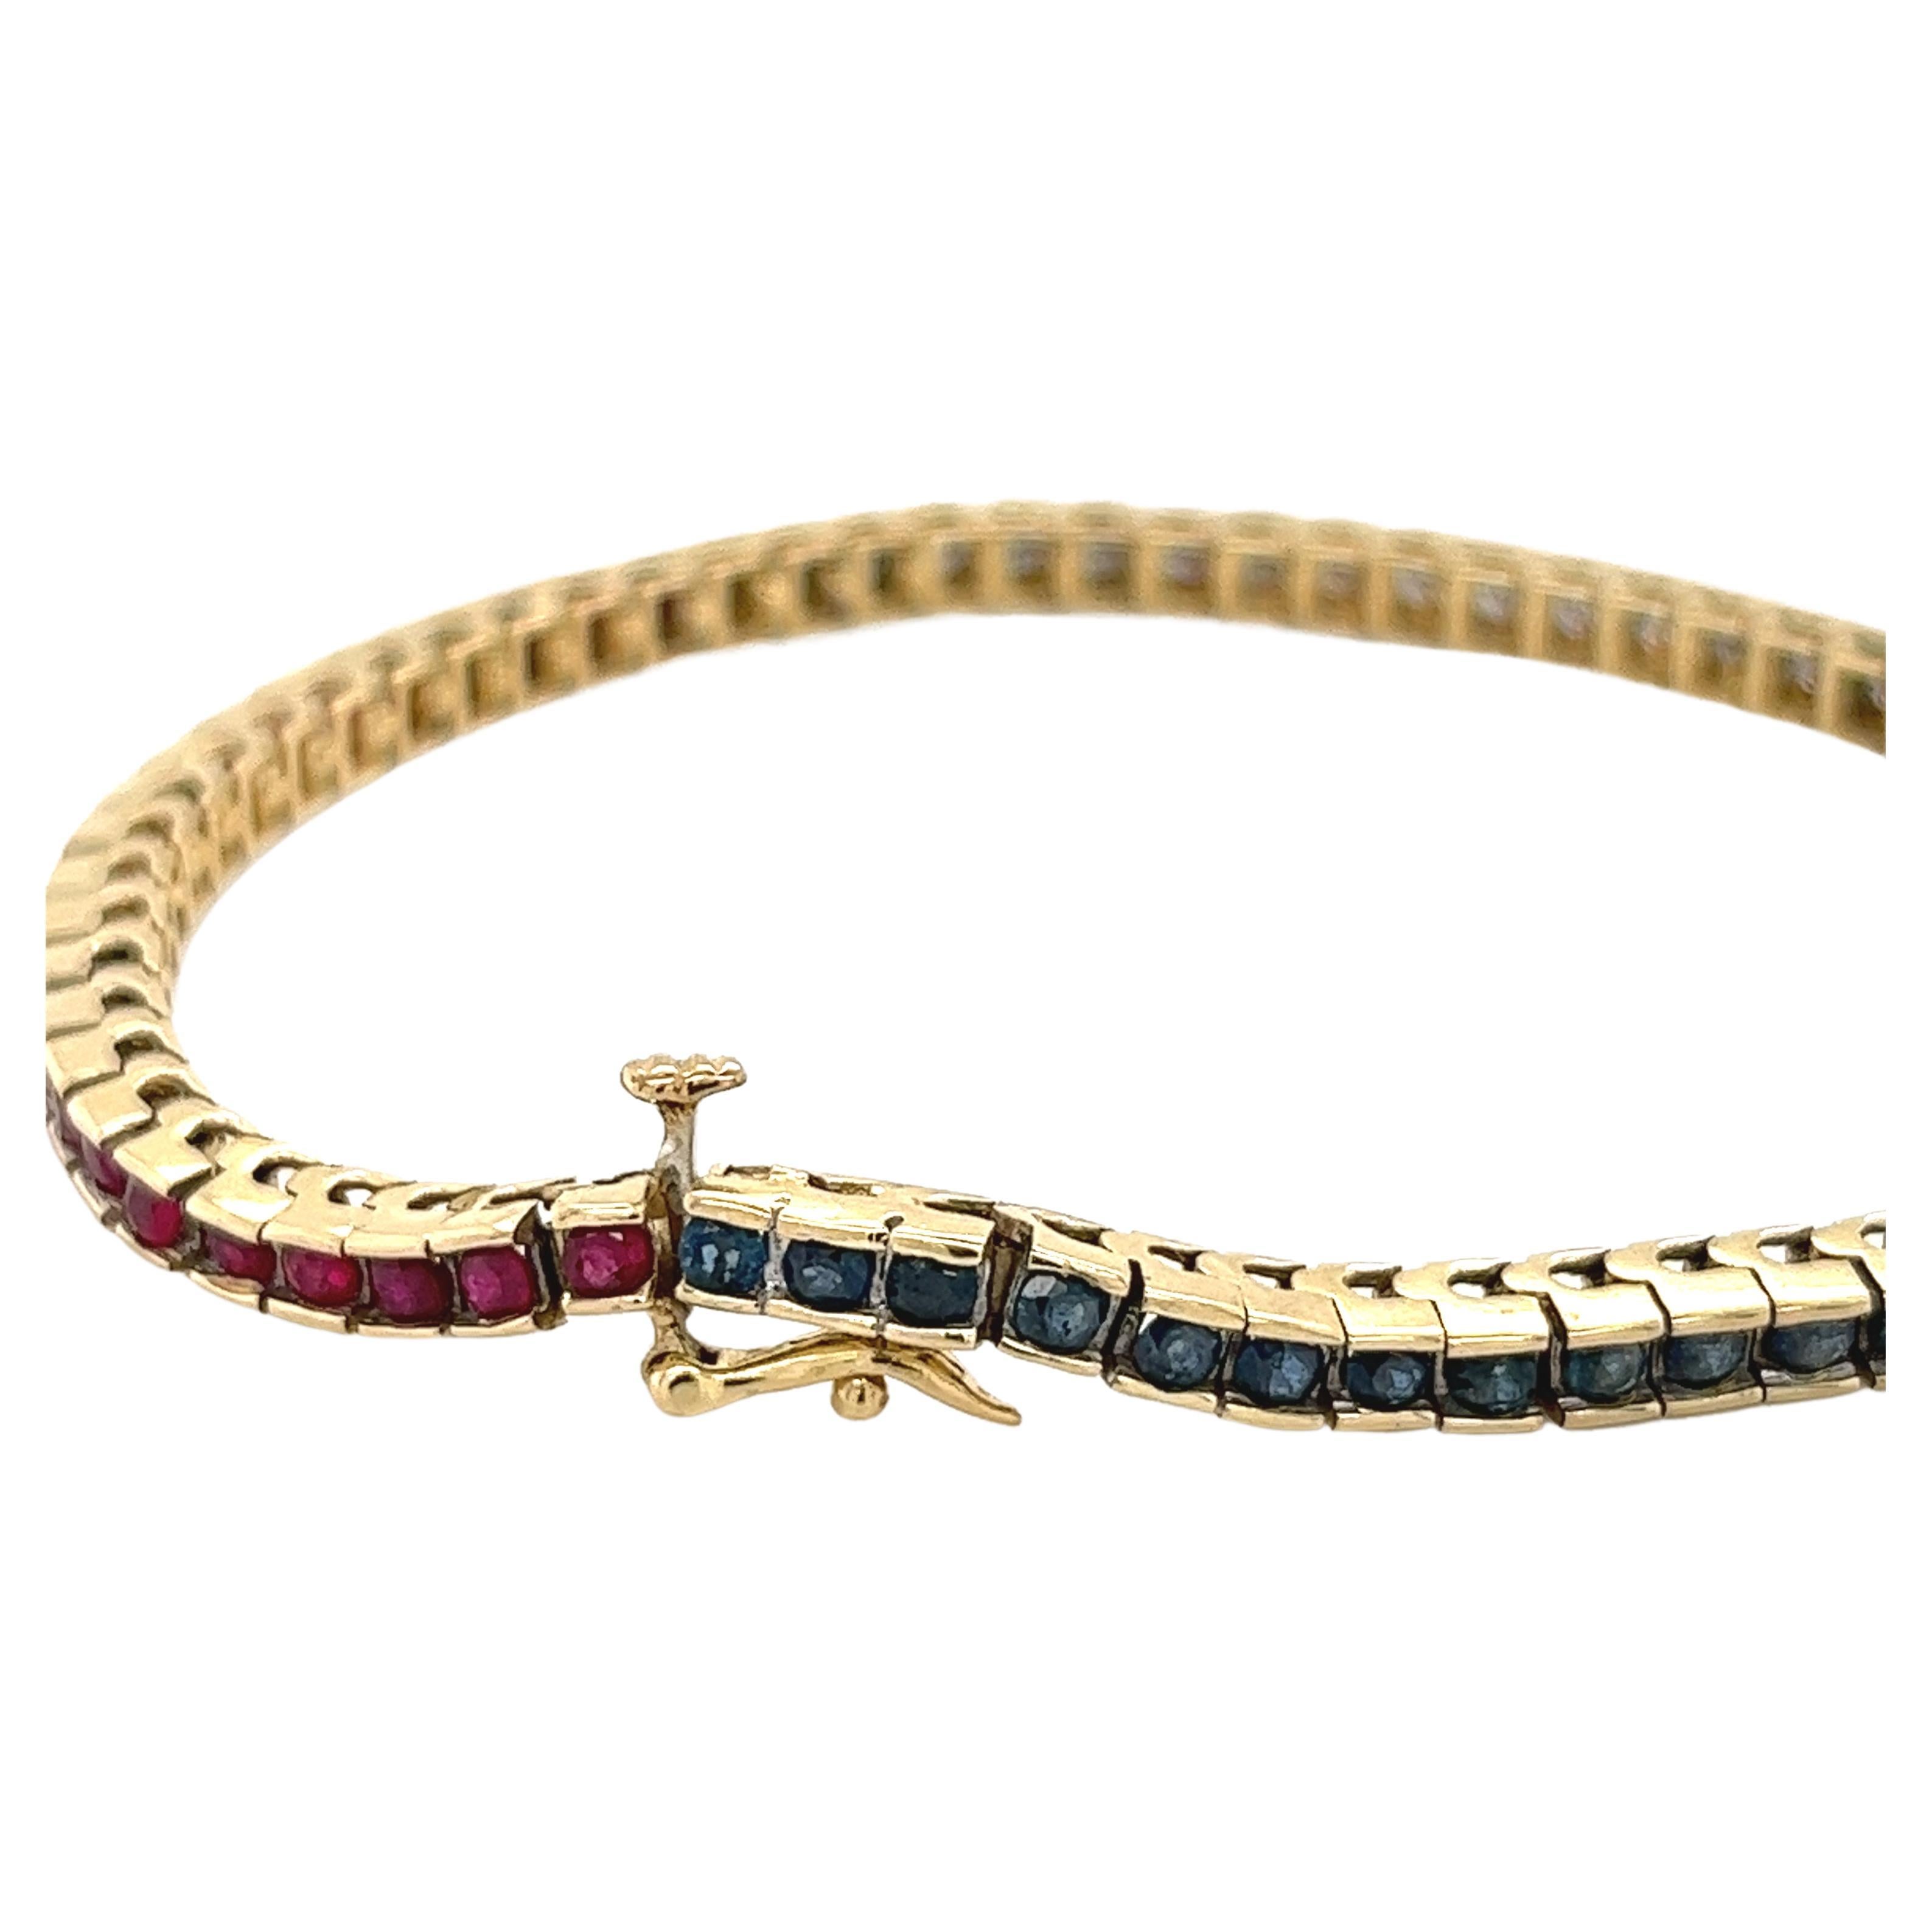 Natural diamond, ruby, and blue sapphire flexible tennis bracelet mounted in a half bezel tension setting. Red ruby, white diamonds, and blue sapphires create this patriotic USA flag-colored bracelet. Set in 14k solid gold, hypoallergenic, and a